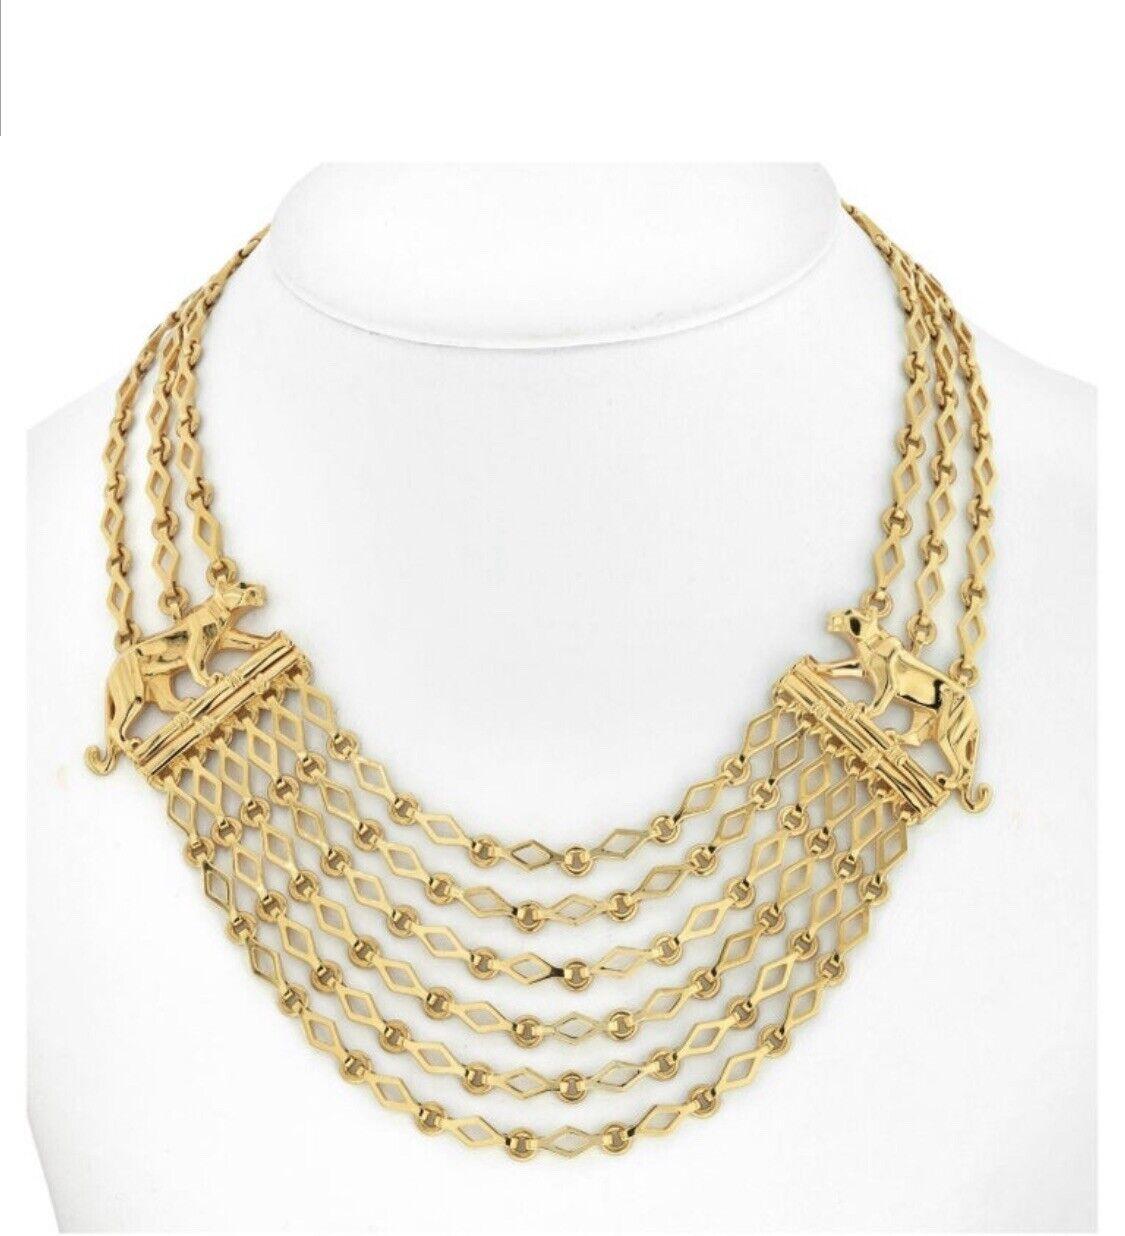 Cartier 18K Yellow Gold Panthere Festoon Multi Chain Collier Necklace.

This is a one of a kind collar necklace by Cartier, made of solid 18k yellow gold. The piece is signed by Cartier on the clasp, has 1.25